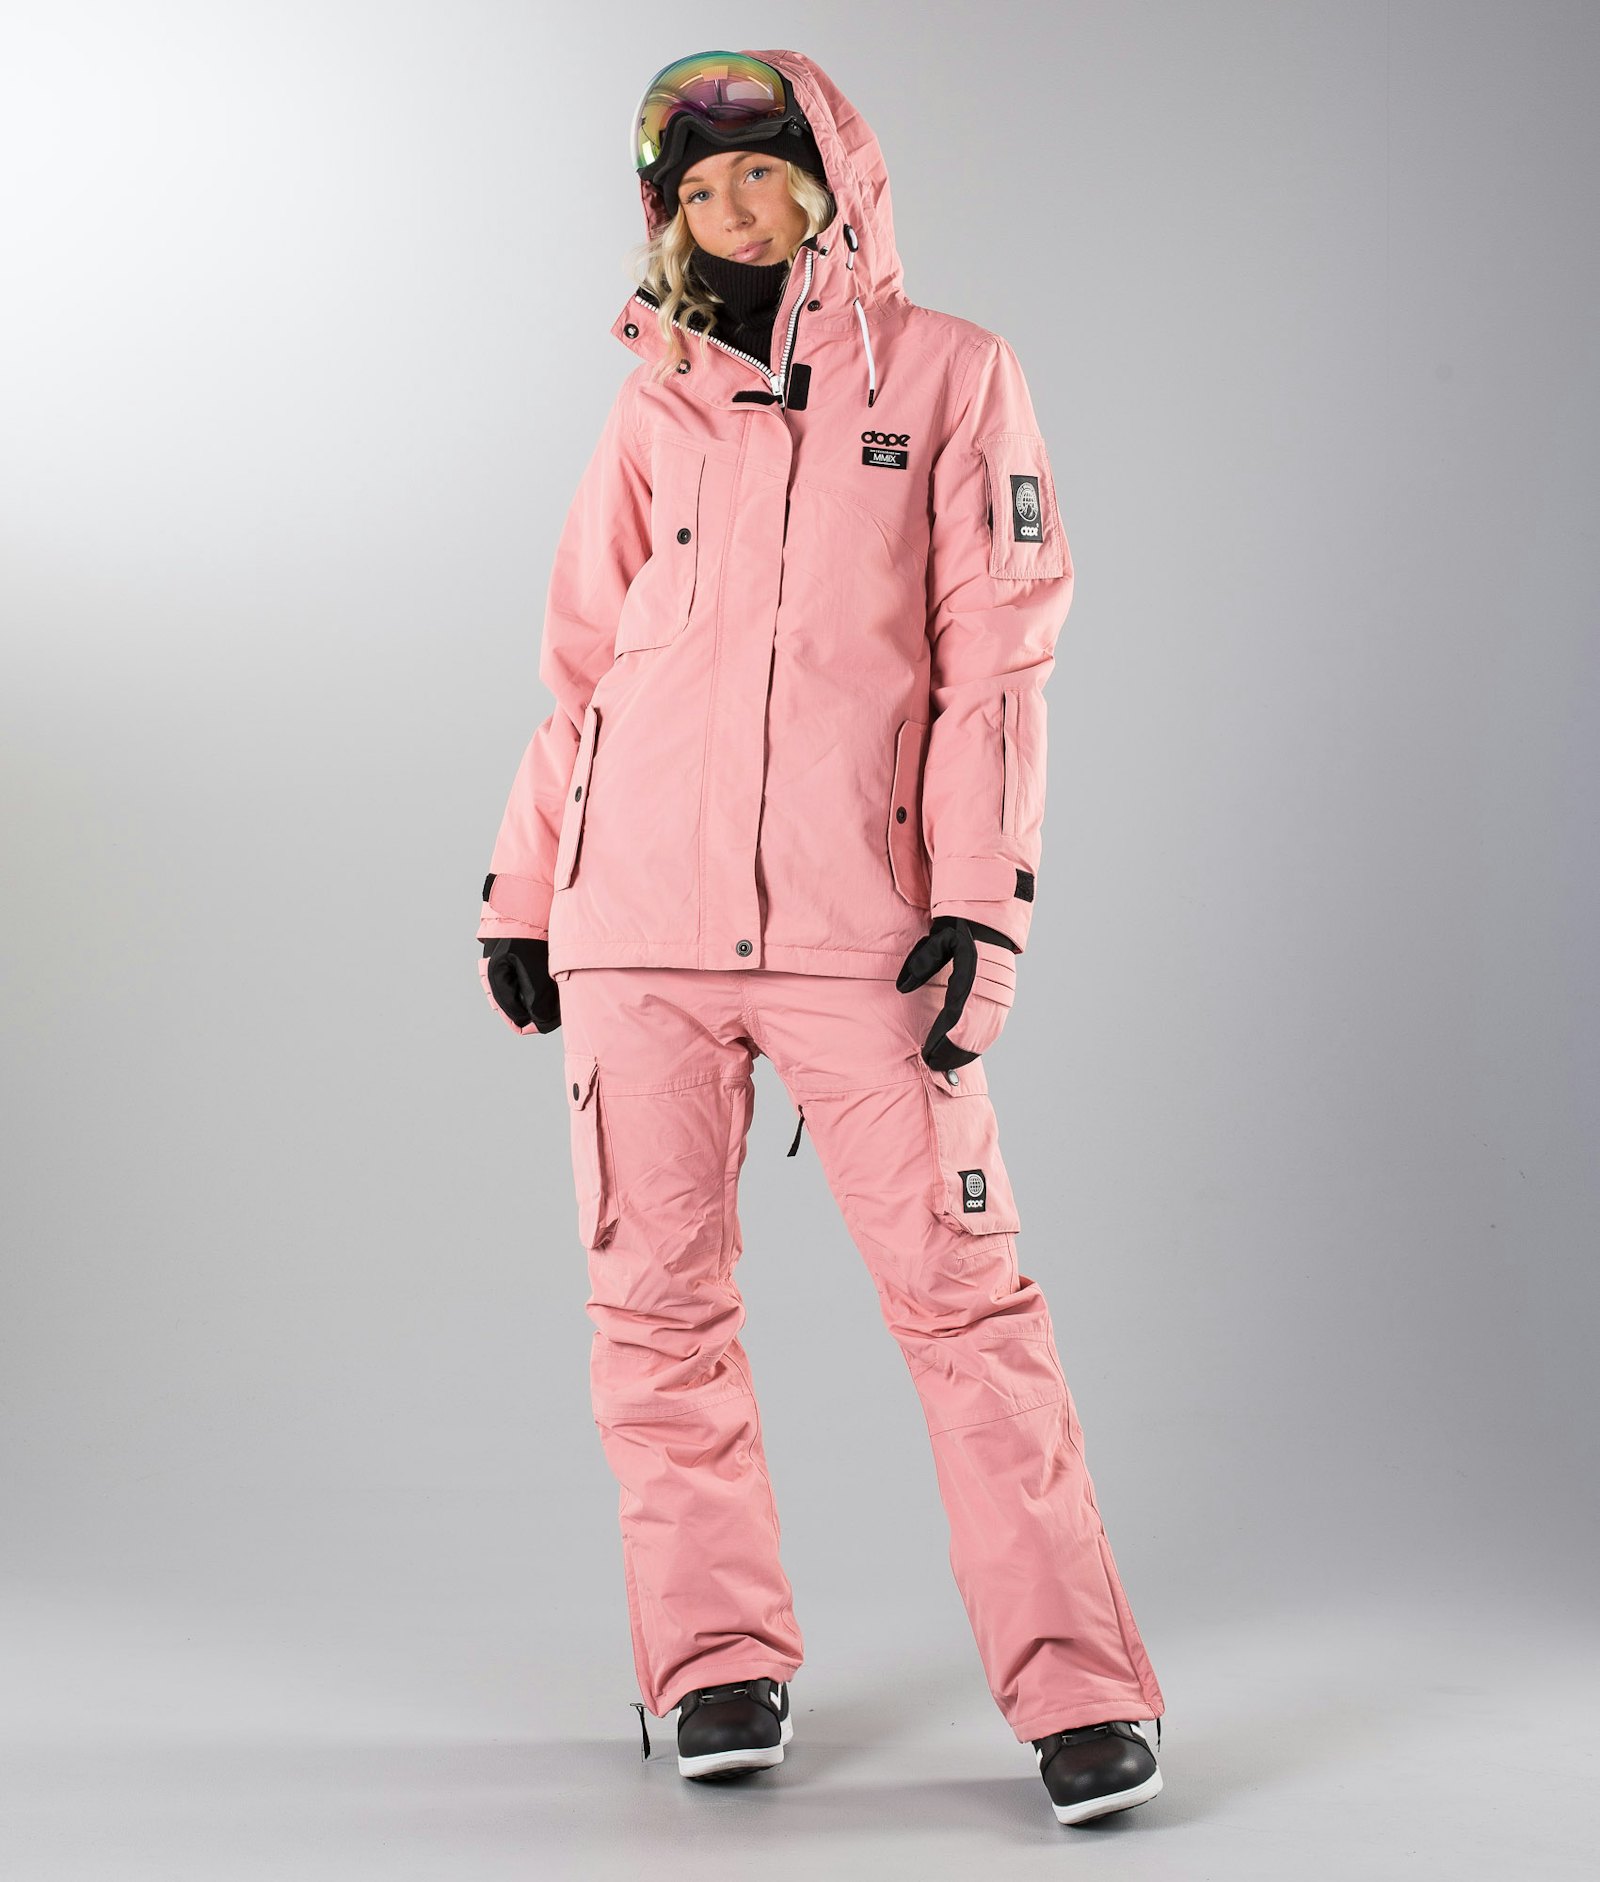 Adept W 2018 Giacca Snowboard Donna Pink